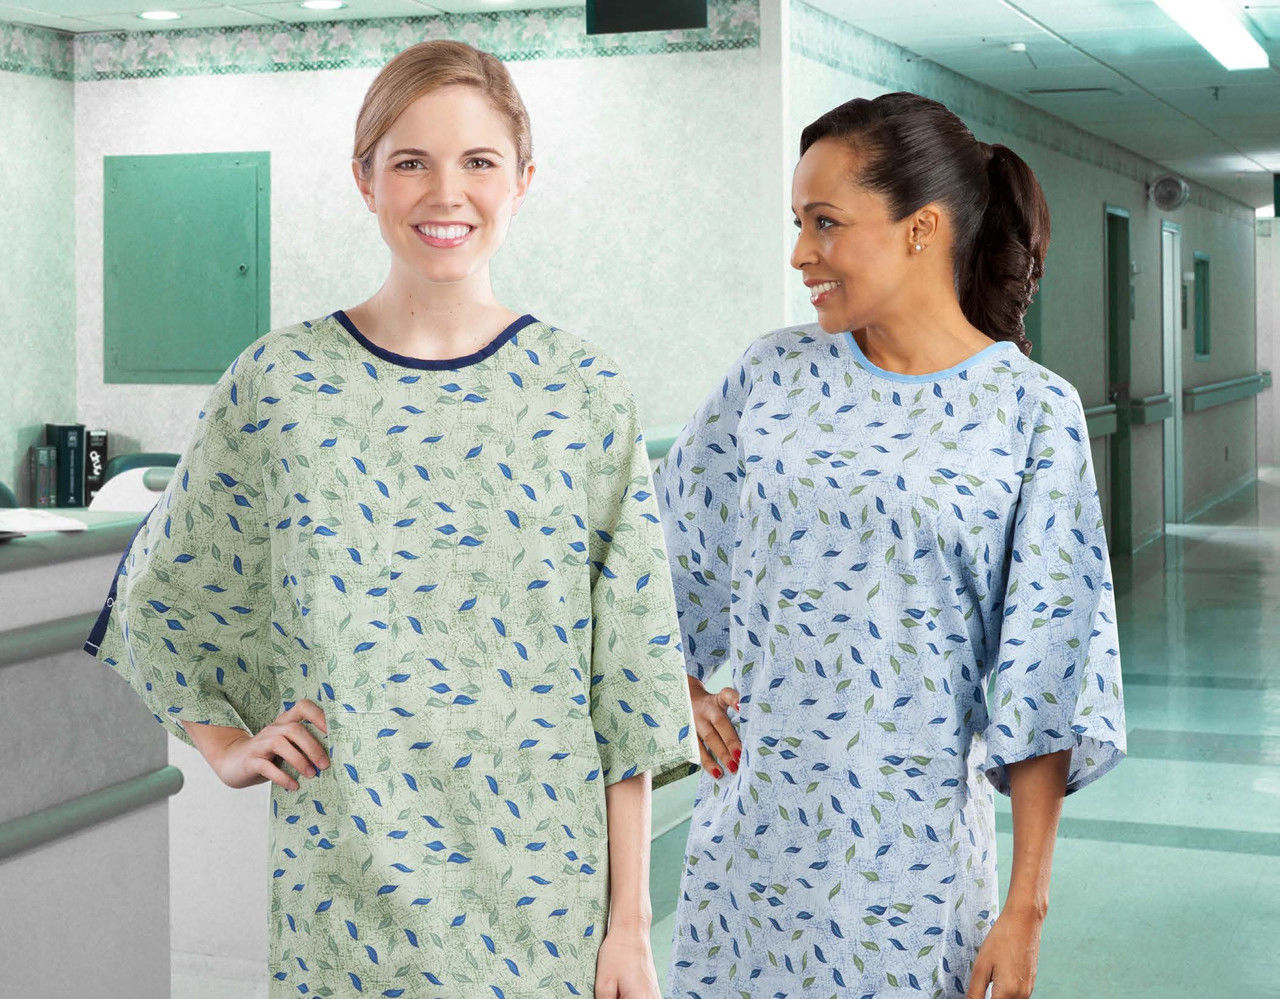 What is the purpose of a patient gown?